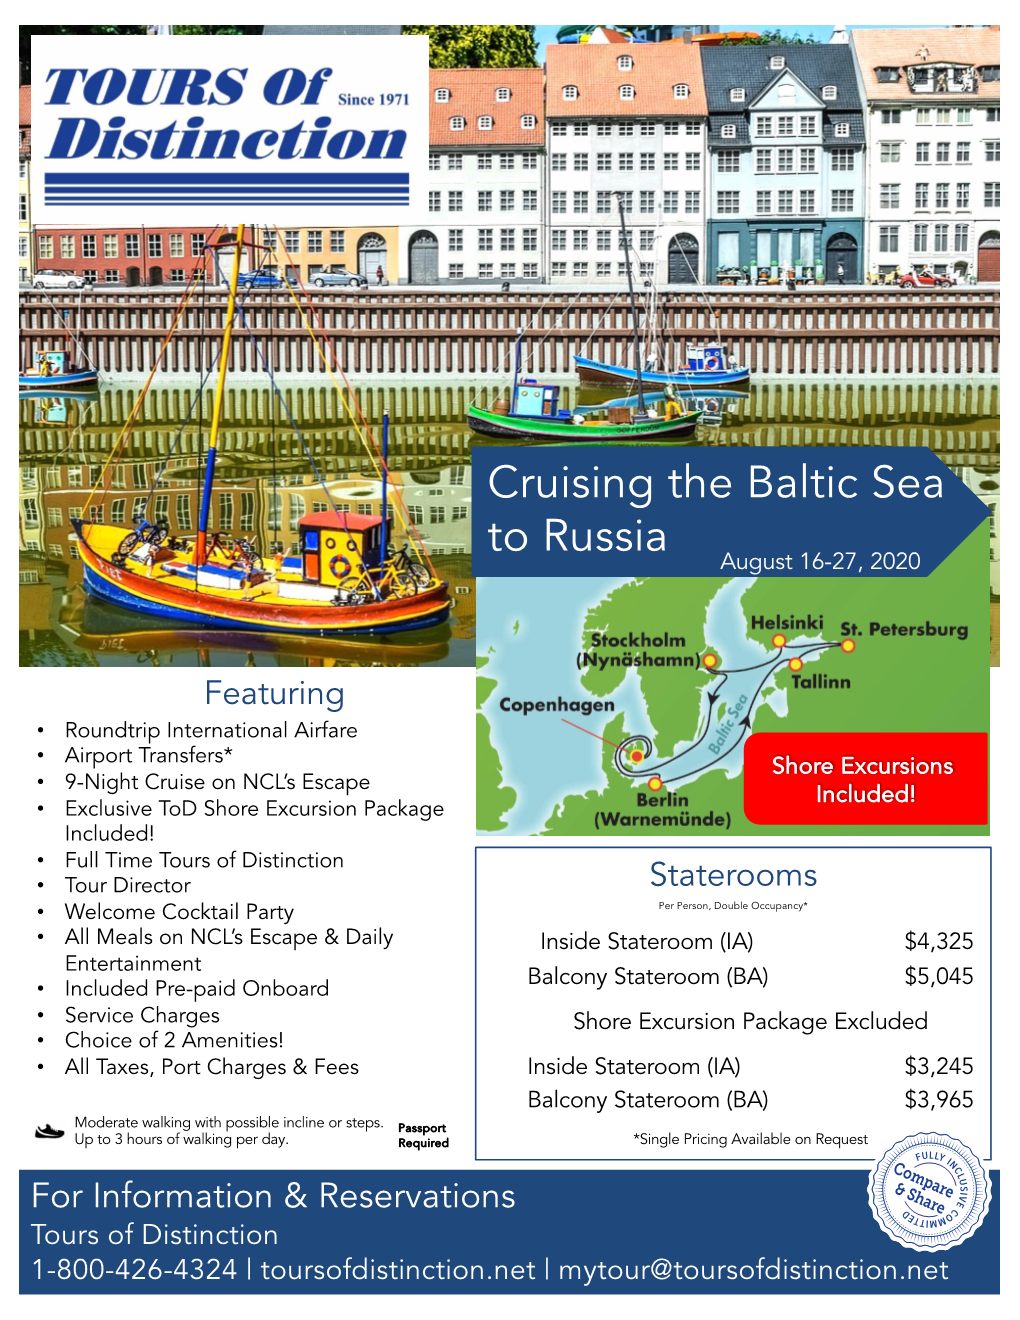 Cruising the Baltic Sea to Russia – Your Itinerary Explore the Northern Beauty of the Baltics on an Exciting 11-Day Journey Steeped in Art, History and Culture